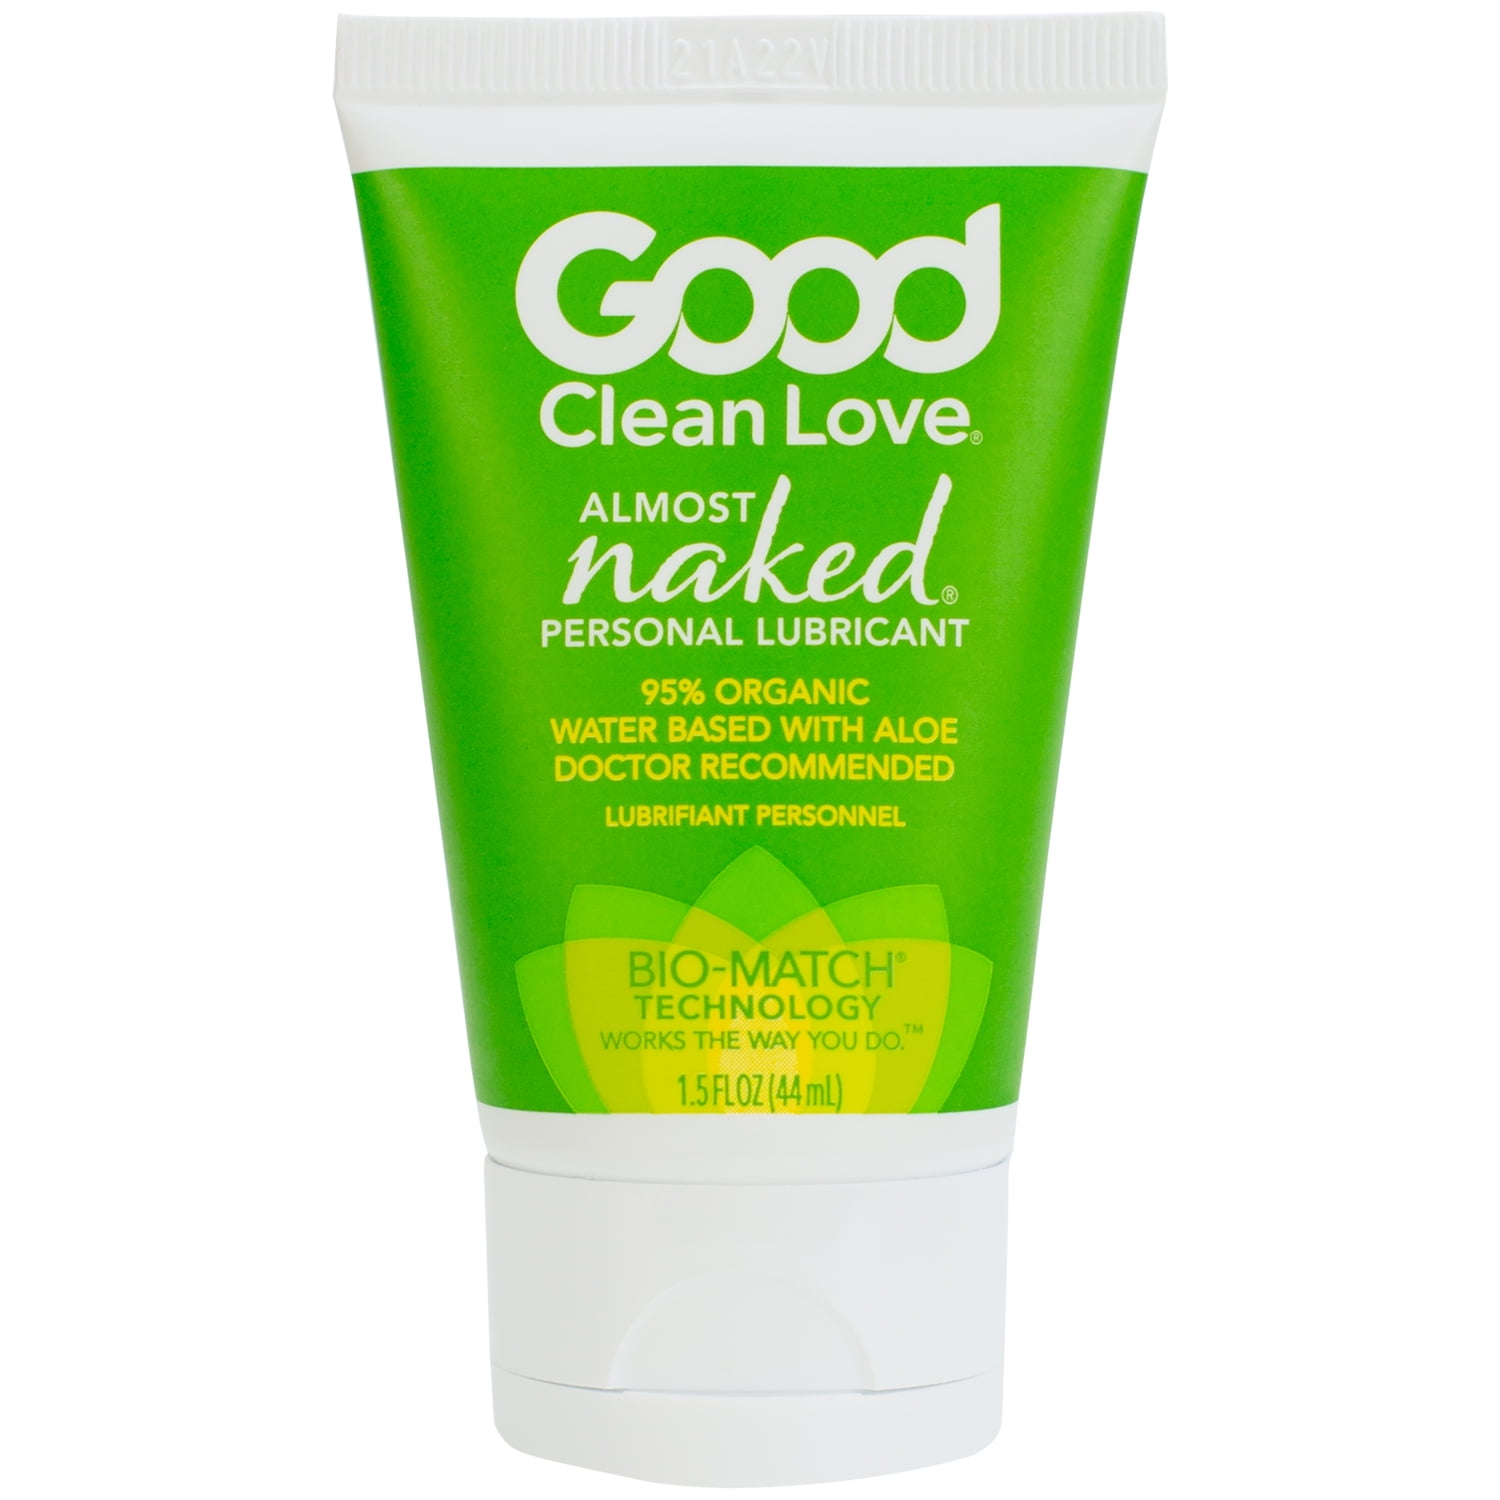 Good Clean Love Almost Naked Personal Lube - 1.5 oz tube